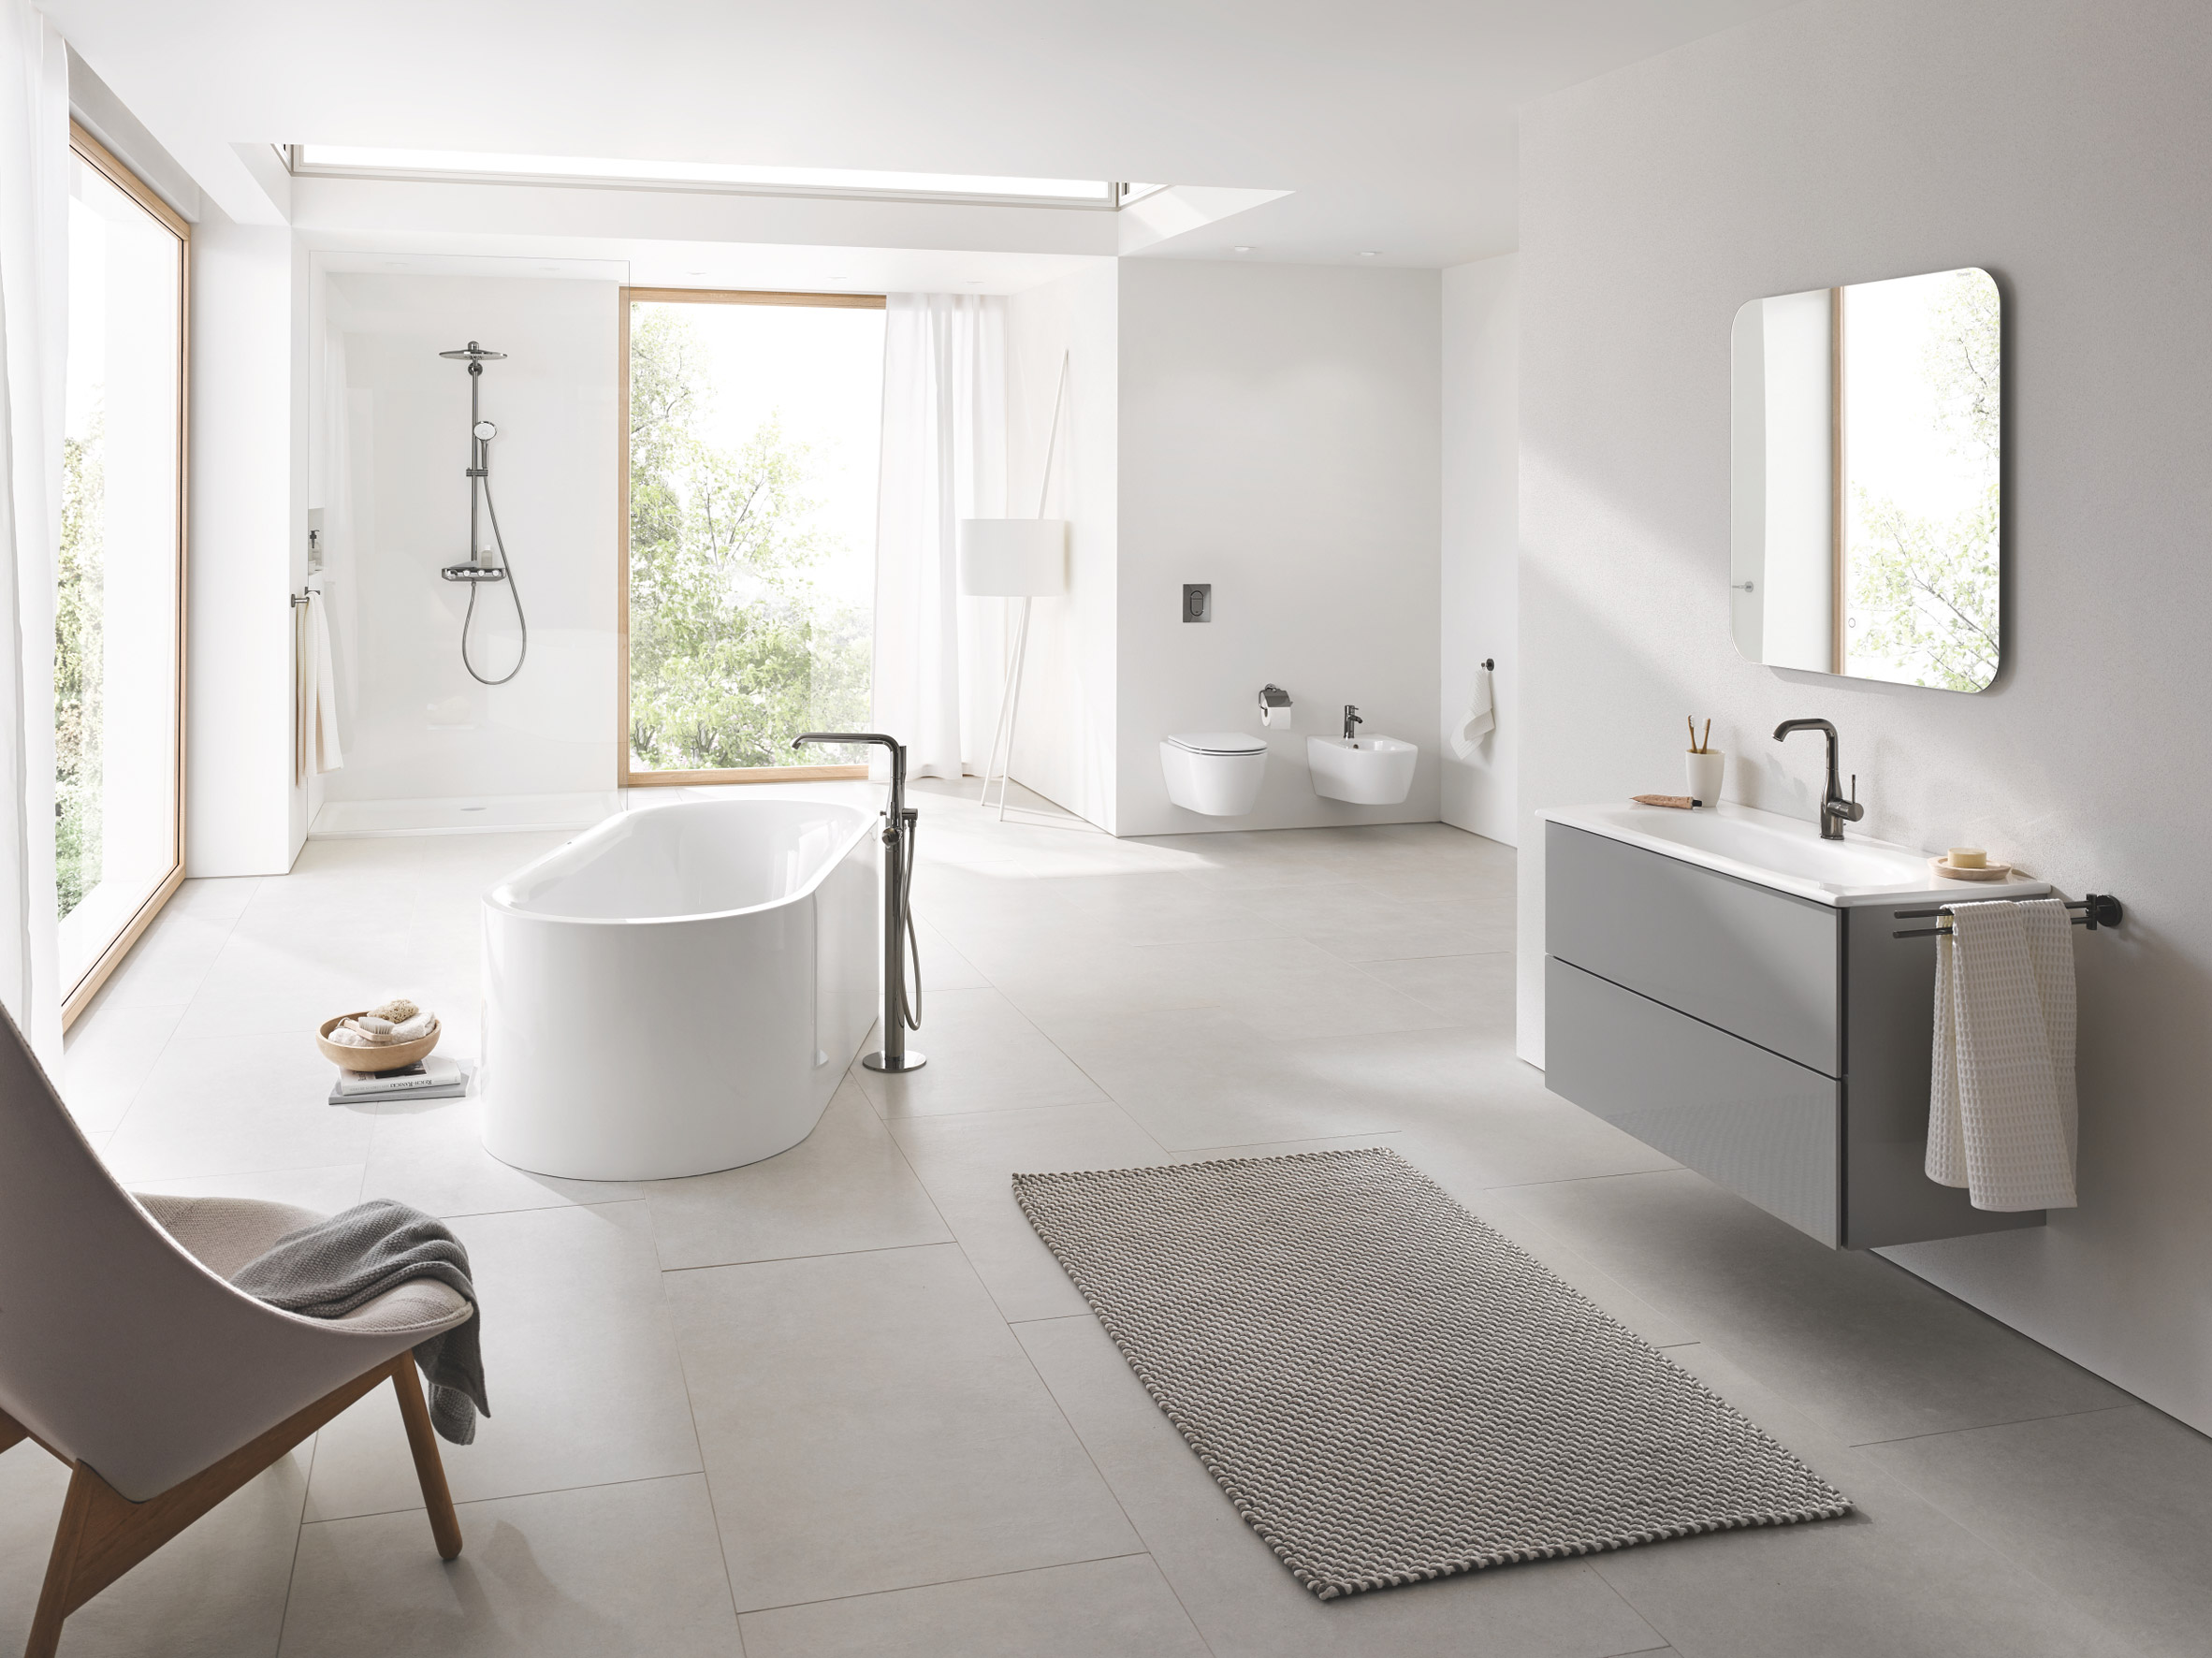 Grohe's Paul Flowers speaks to Dezeen about the future of bathroom design as part of VDF